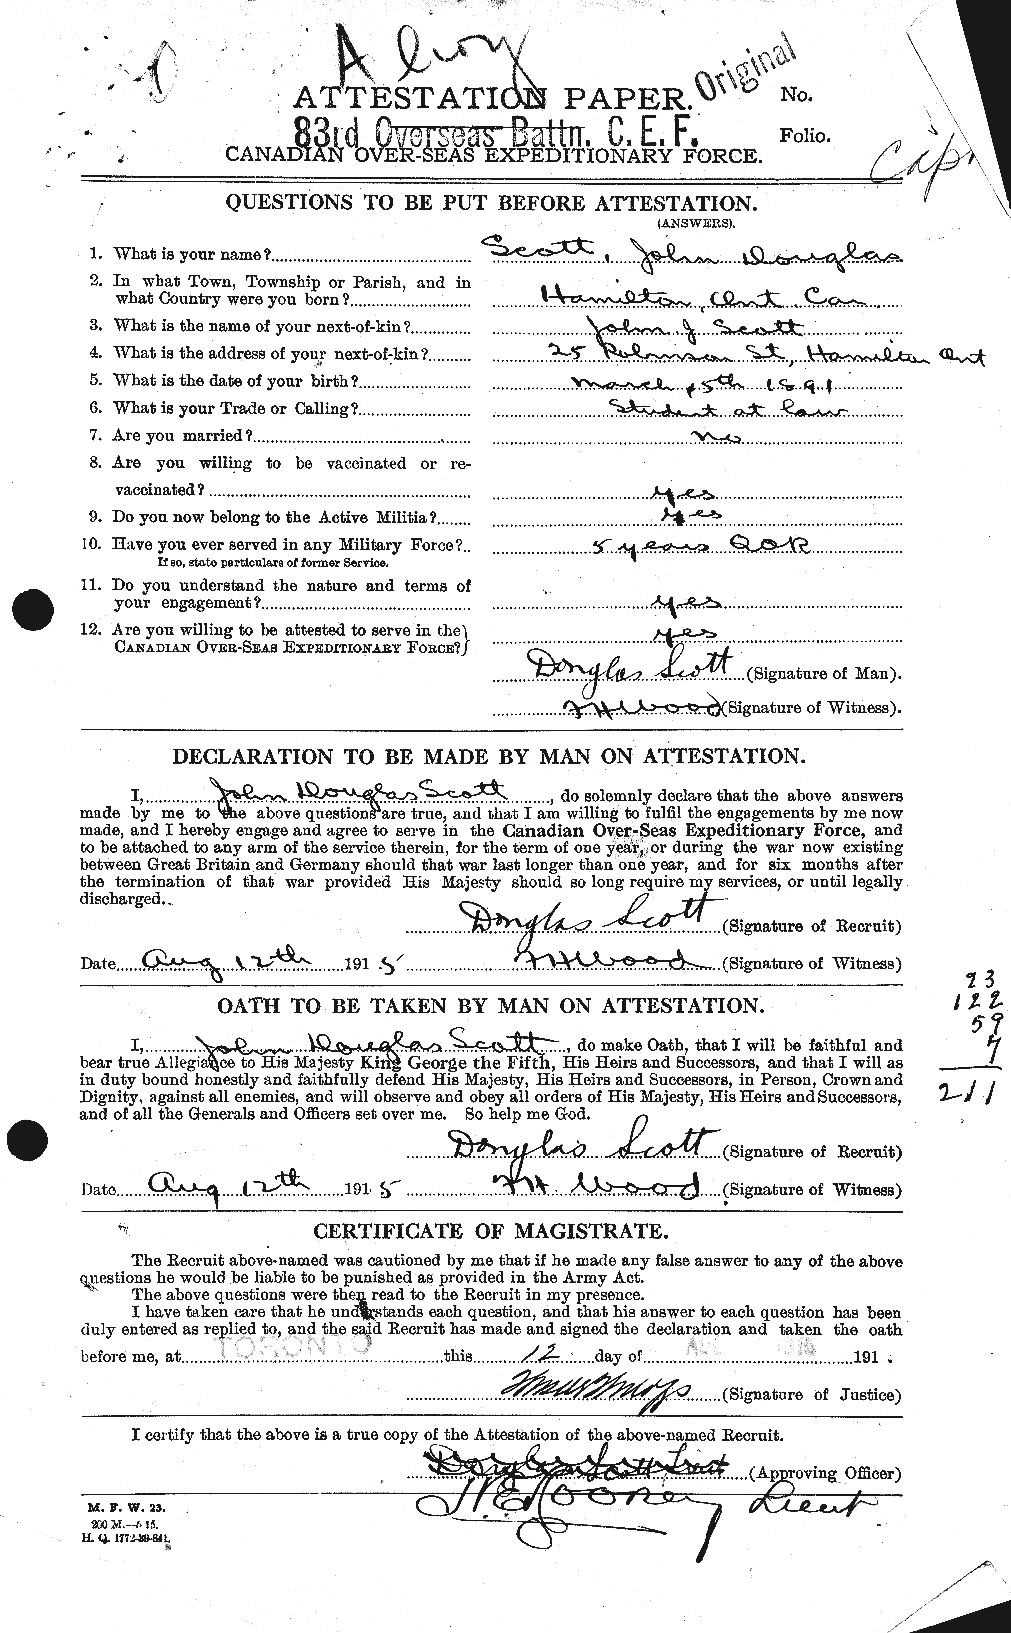 Personnel Records of the First World War - CEF 084641a